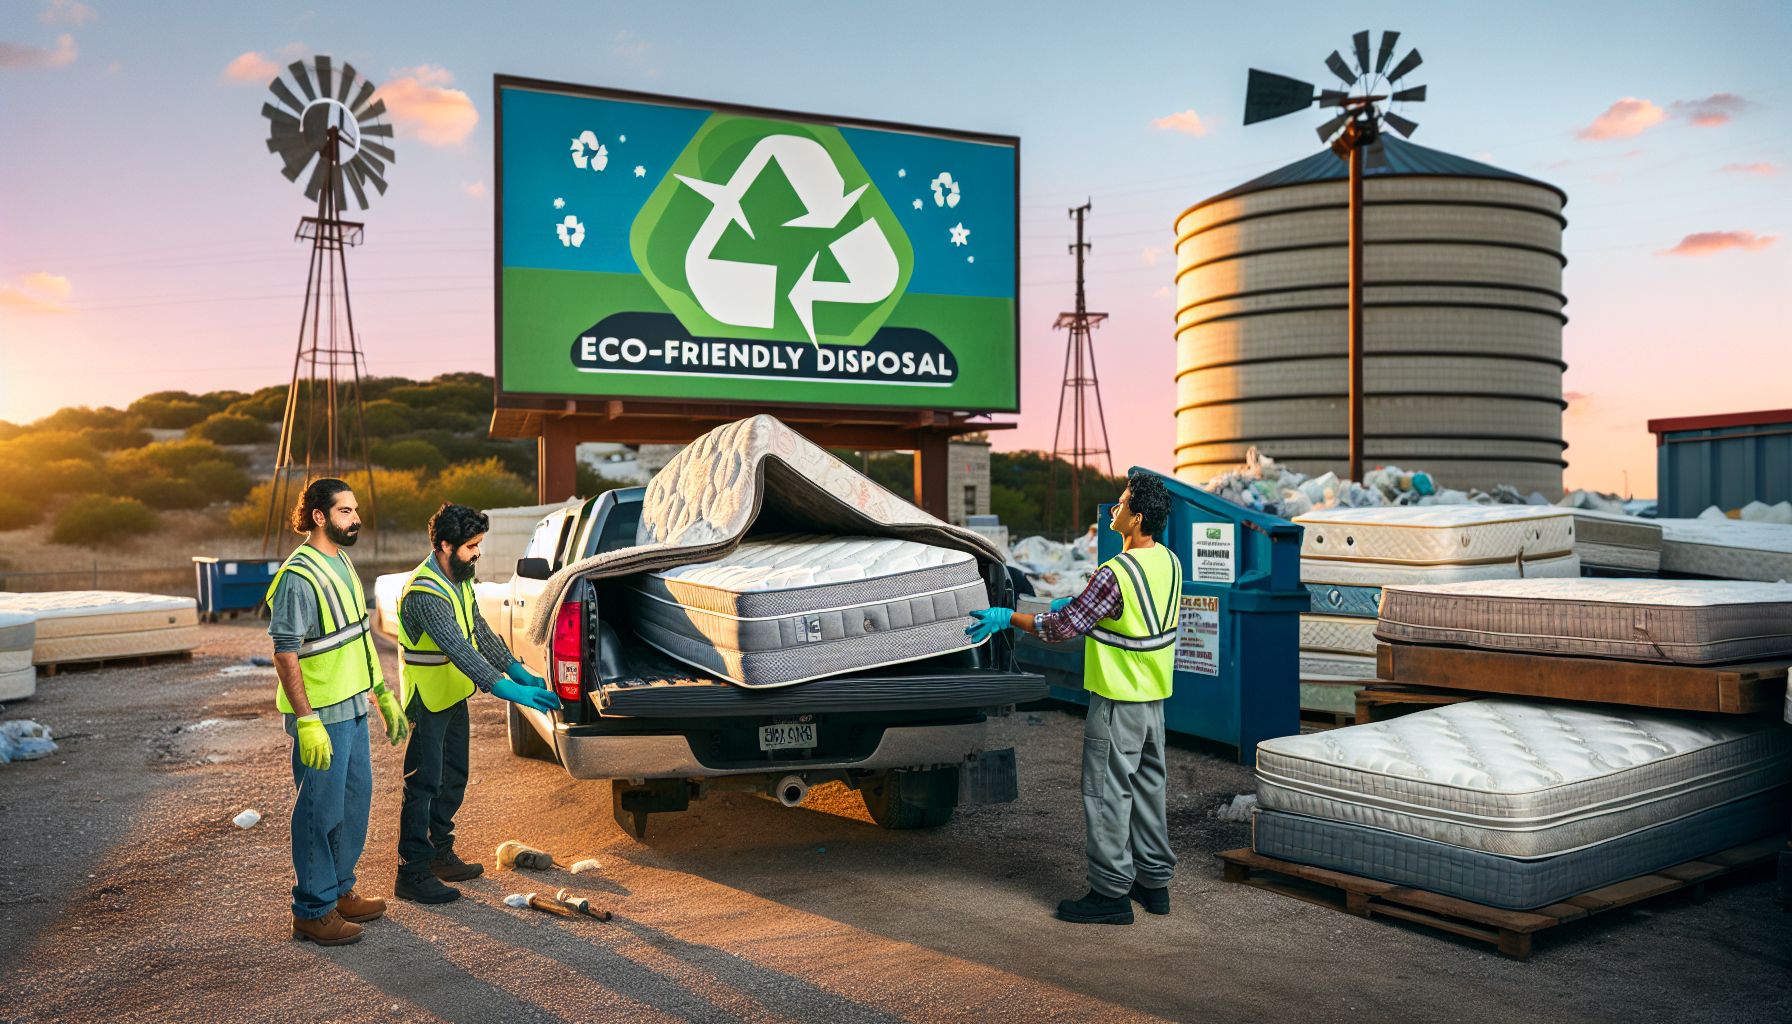 Recycling center in Round Rock accepting mattresses for eco-friendly disposal